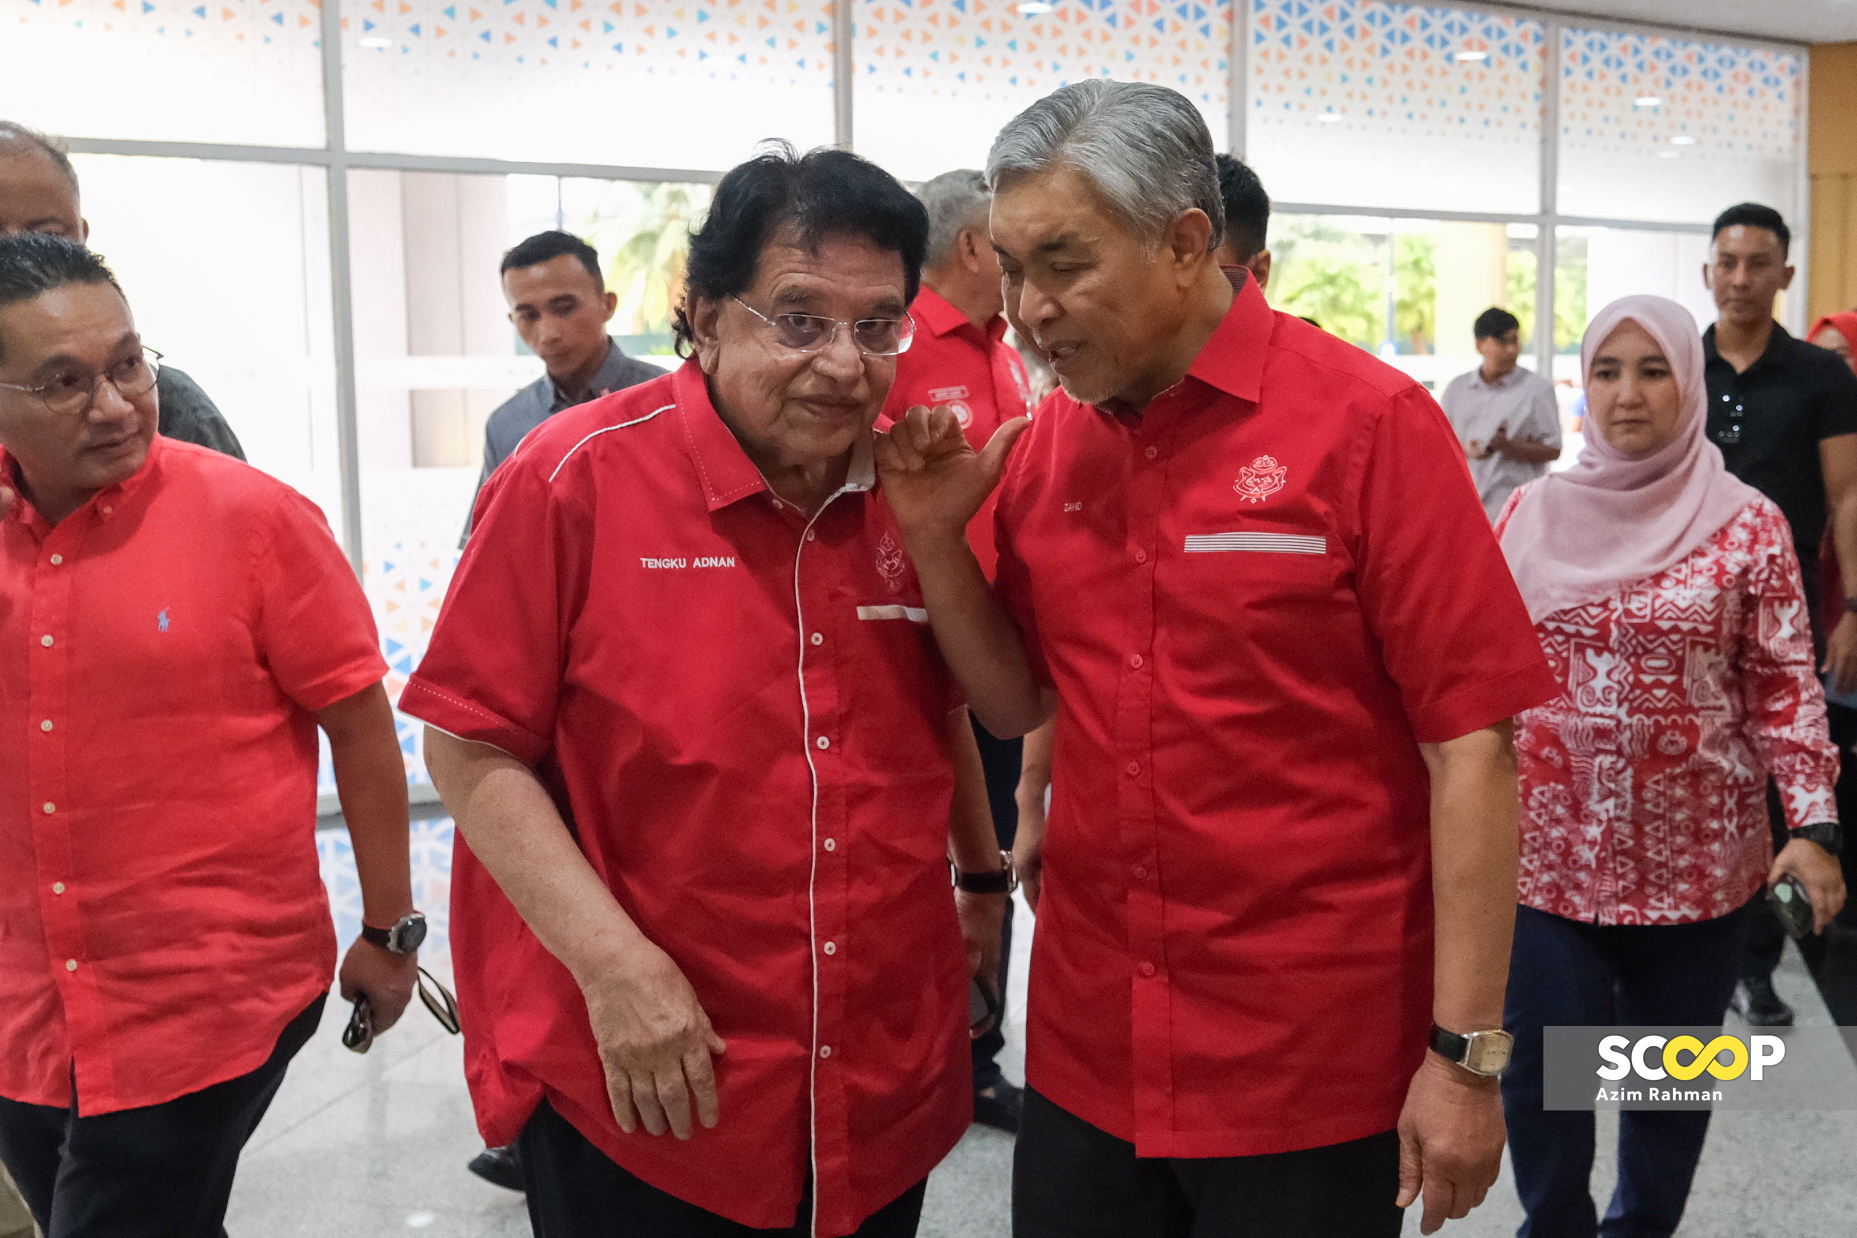 [UPDATED] Urgent meeting at Umno HQ: Zahid leads efforts for Najib's pardon appeal